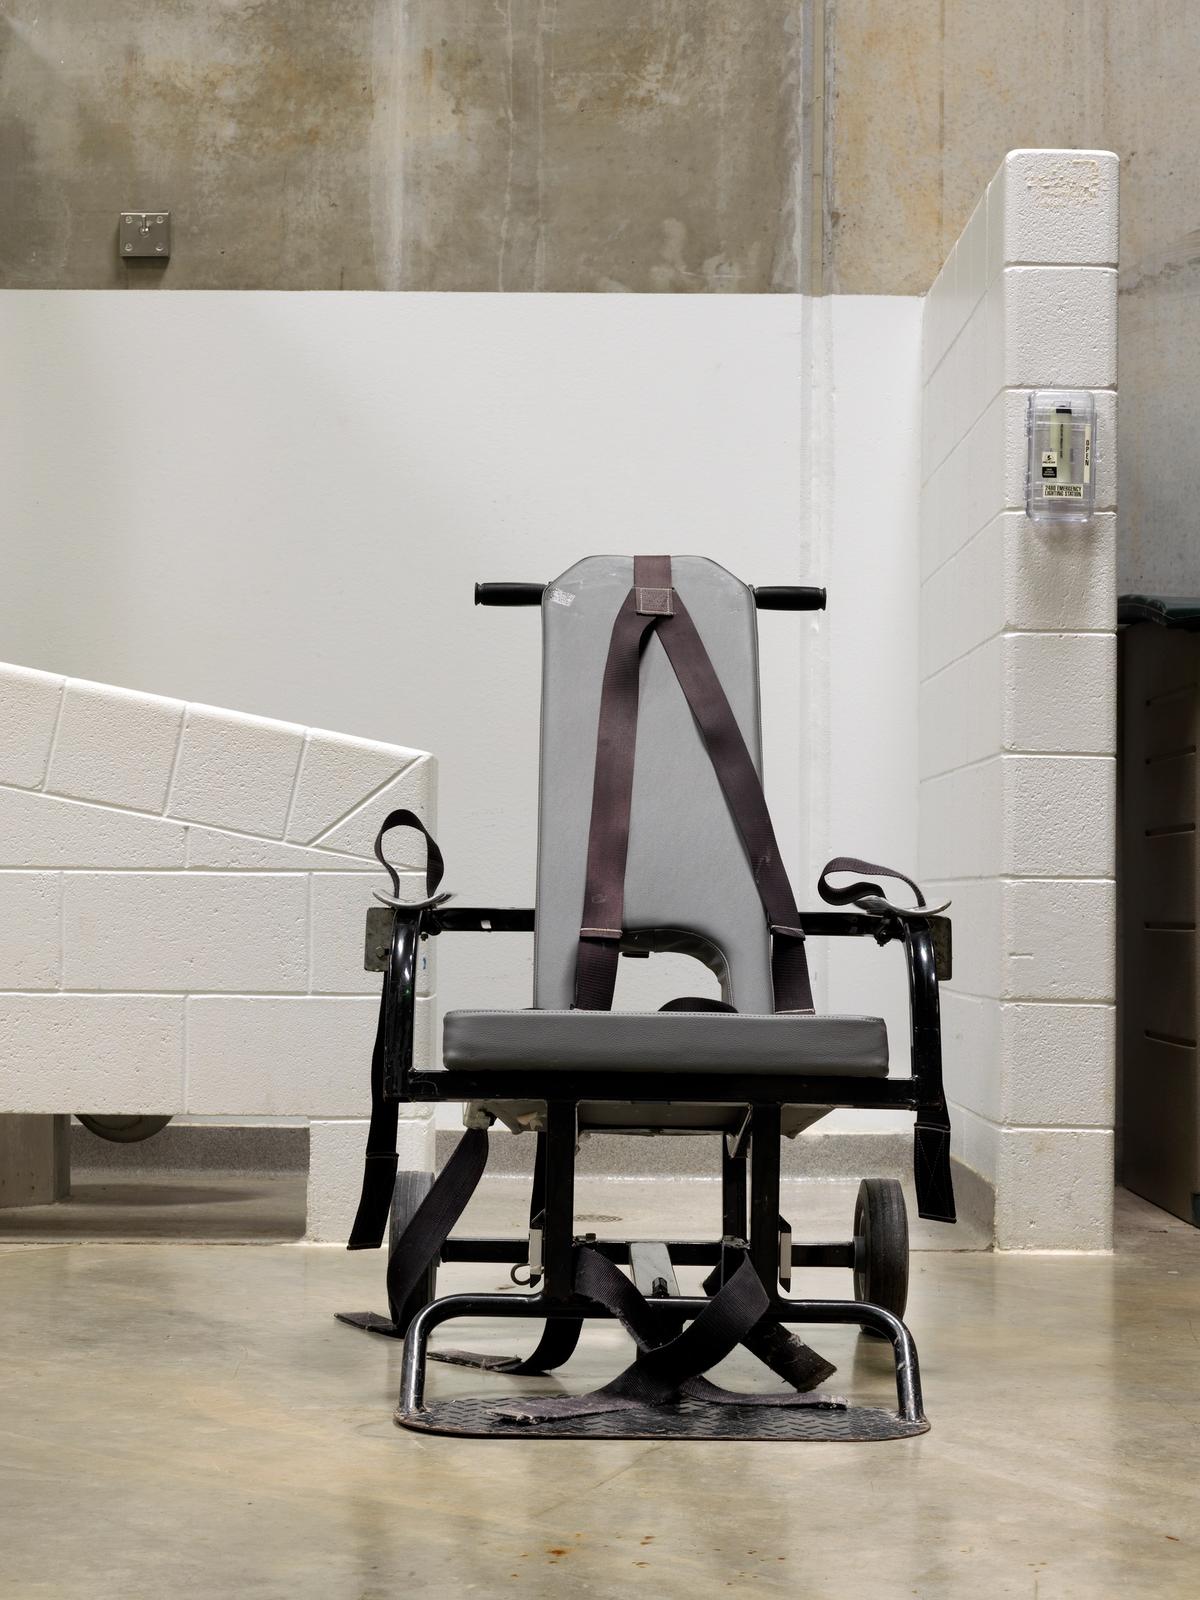 Edmund Clark, Camp 6, mobile force feeding chair (2009) Courtesy the artist and Flowers Gallery